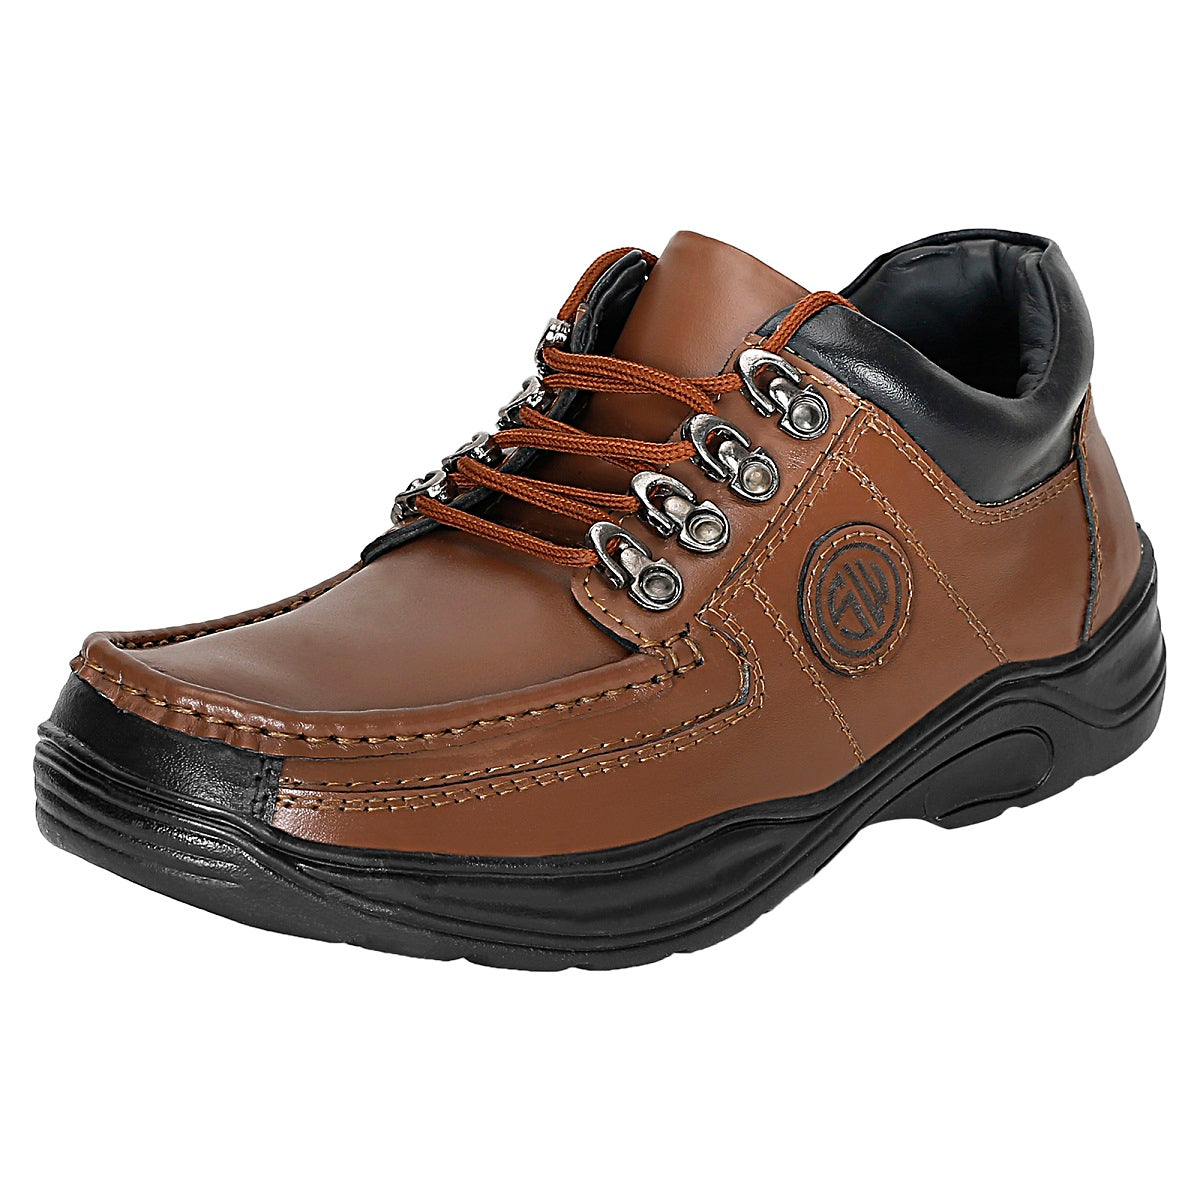 Brown Casual Shoes For Men - Defective